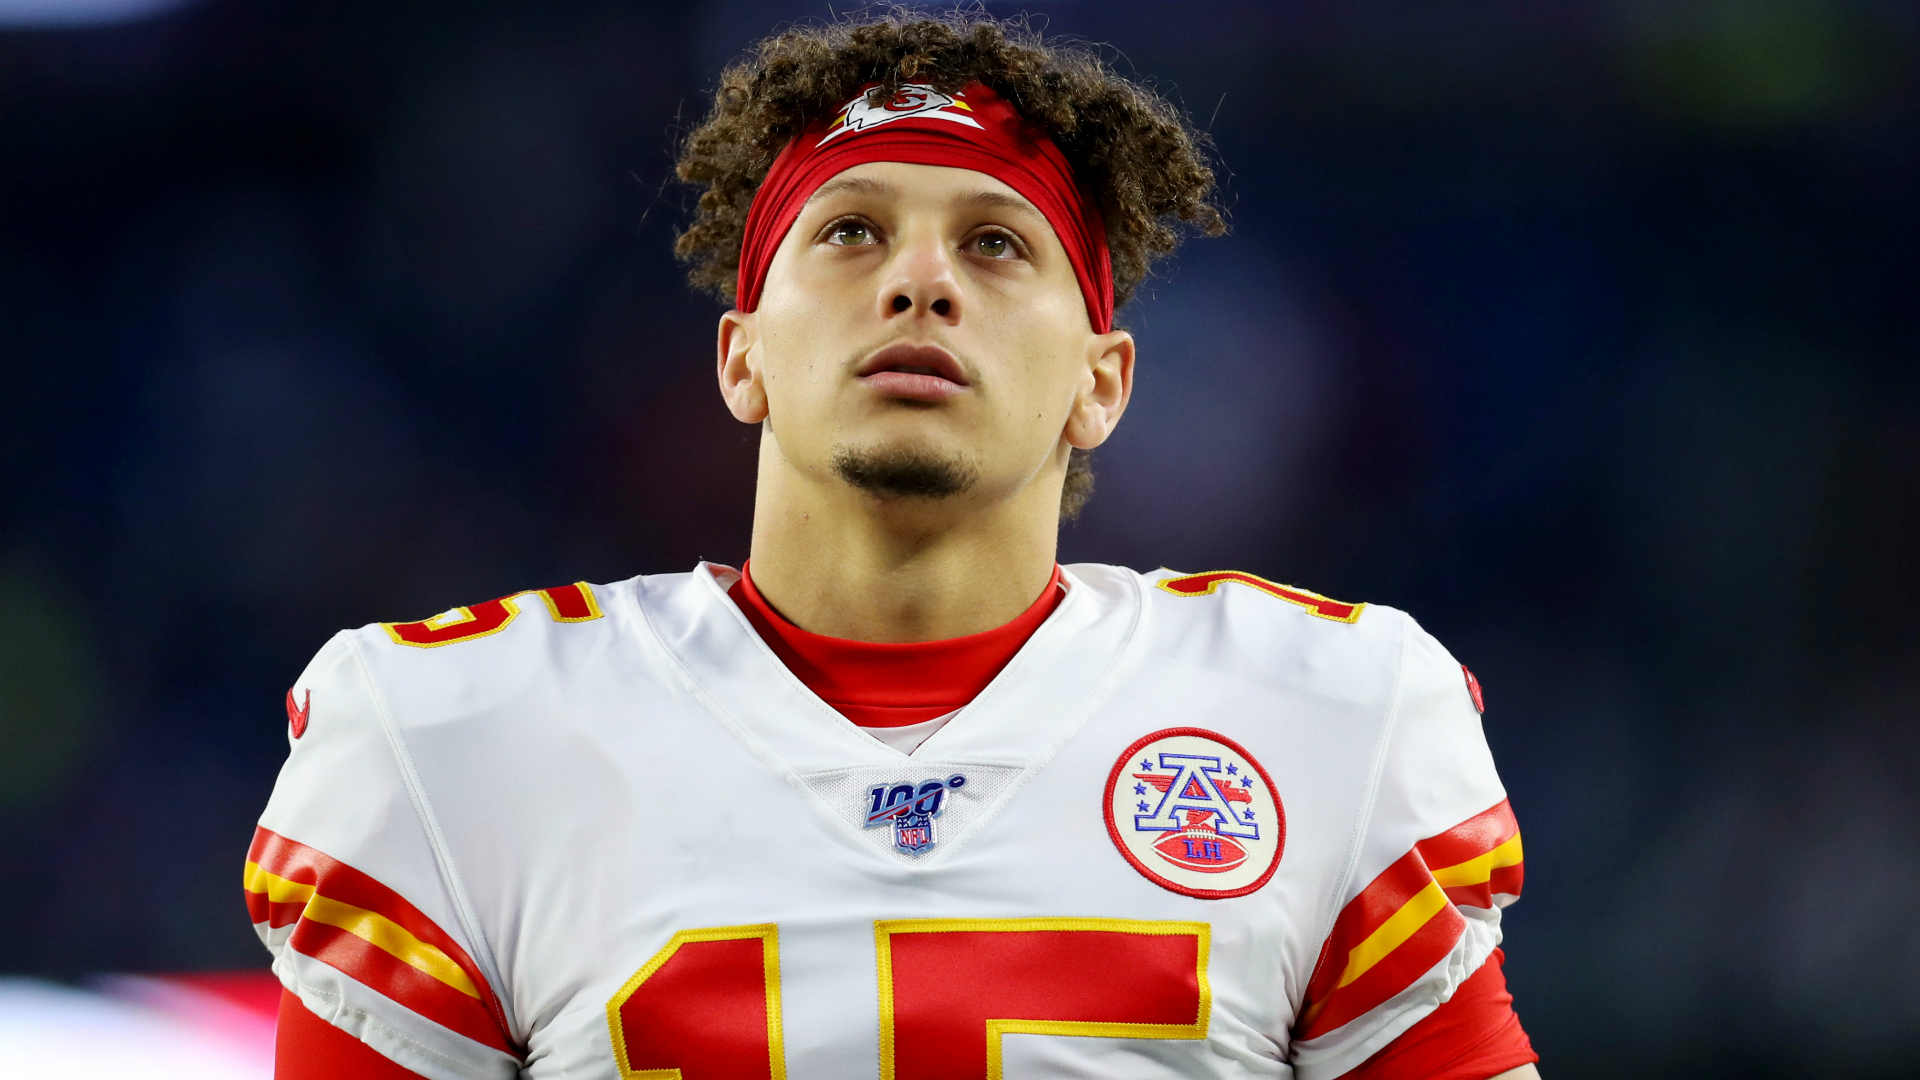 Andy Reid provided an update on Kansas City Chiefs star Patrick Mahomes, who hurt his hand on Sunday.